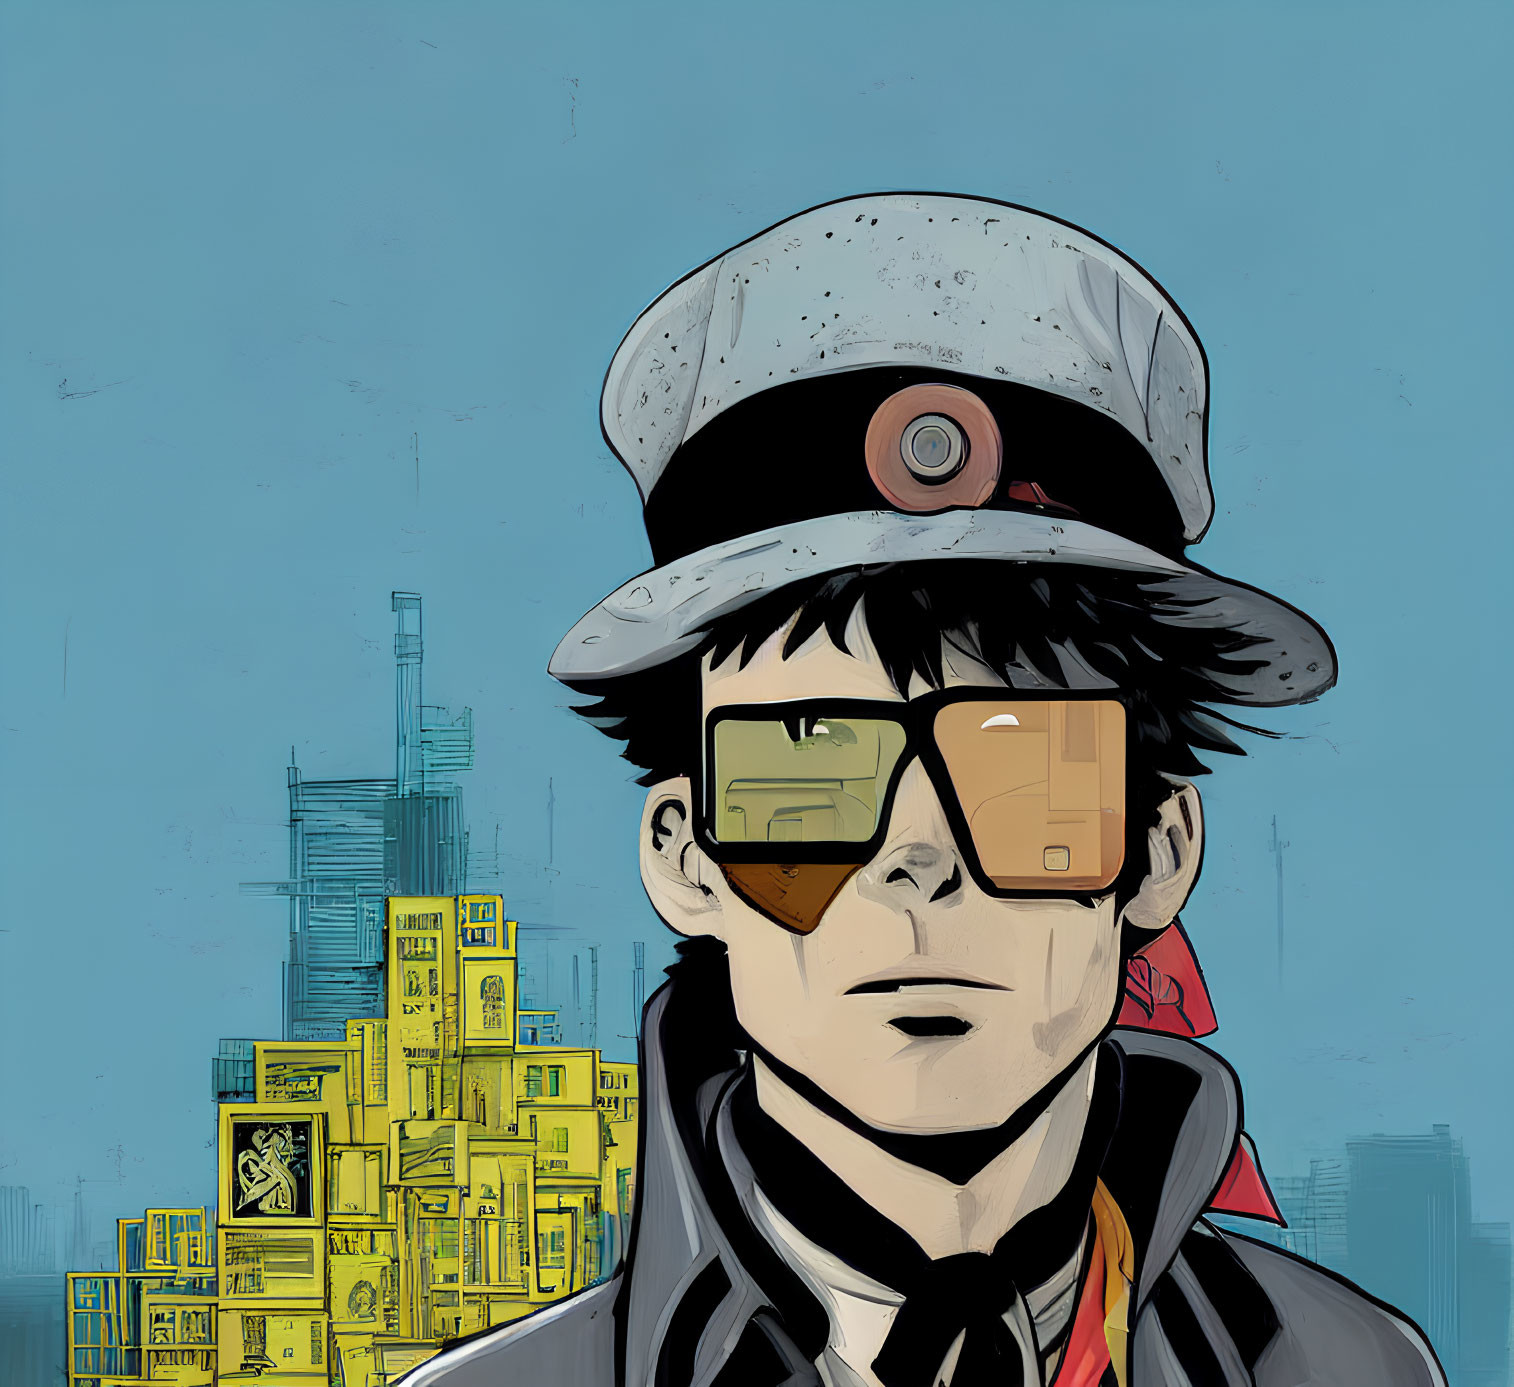 Stylized illustration of man with hat and glasses, city skyline, and yellow containers.